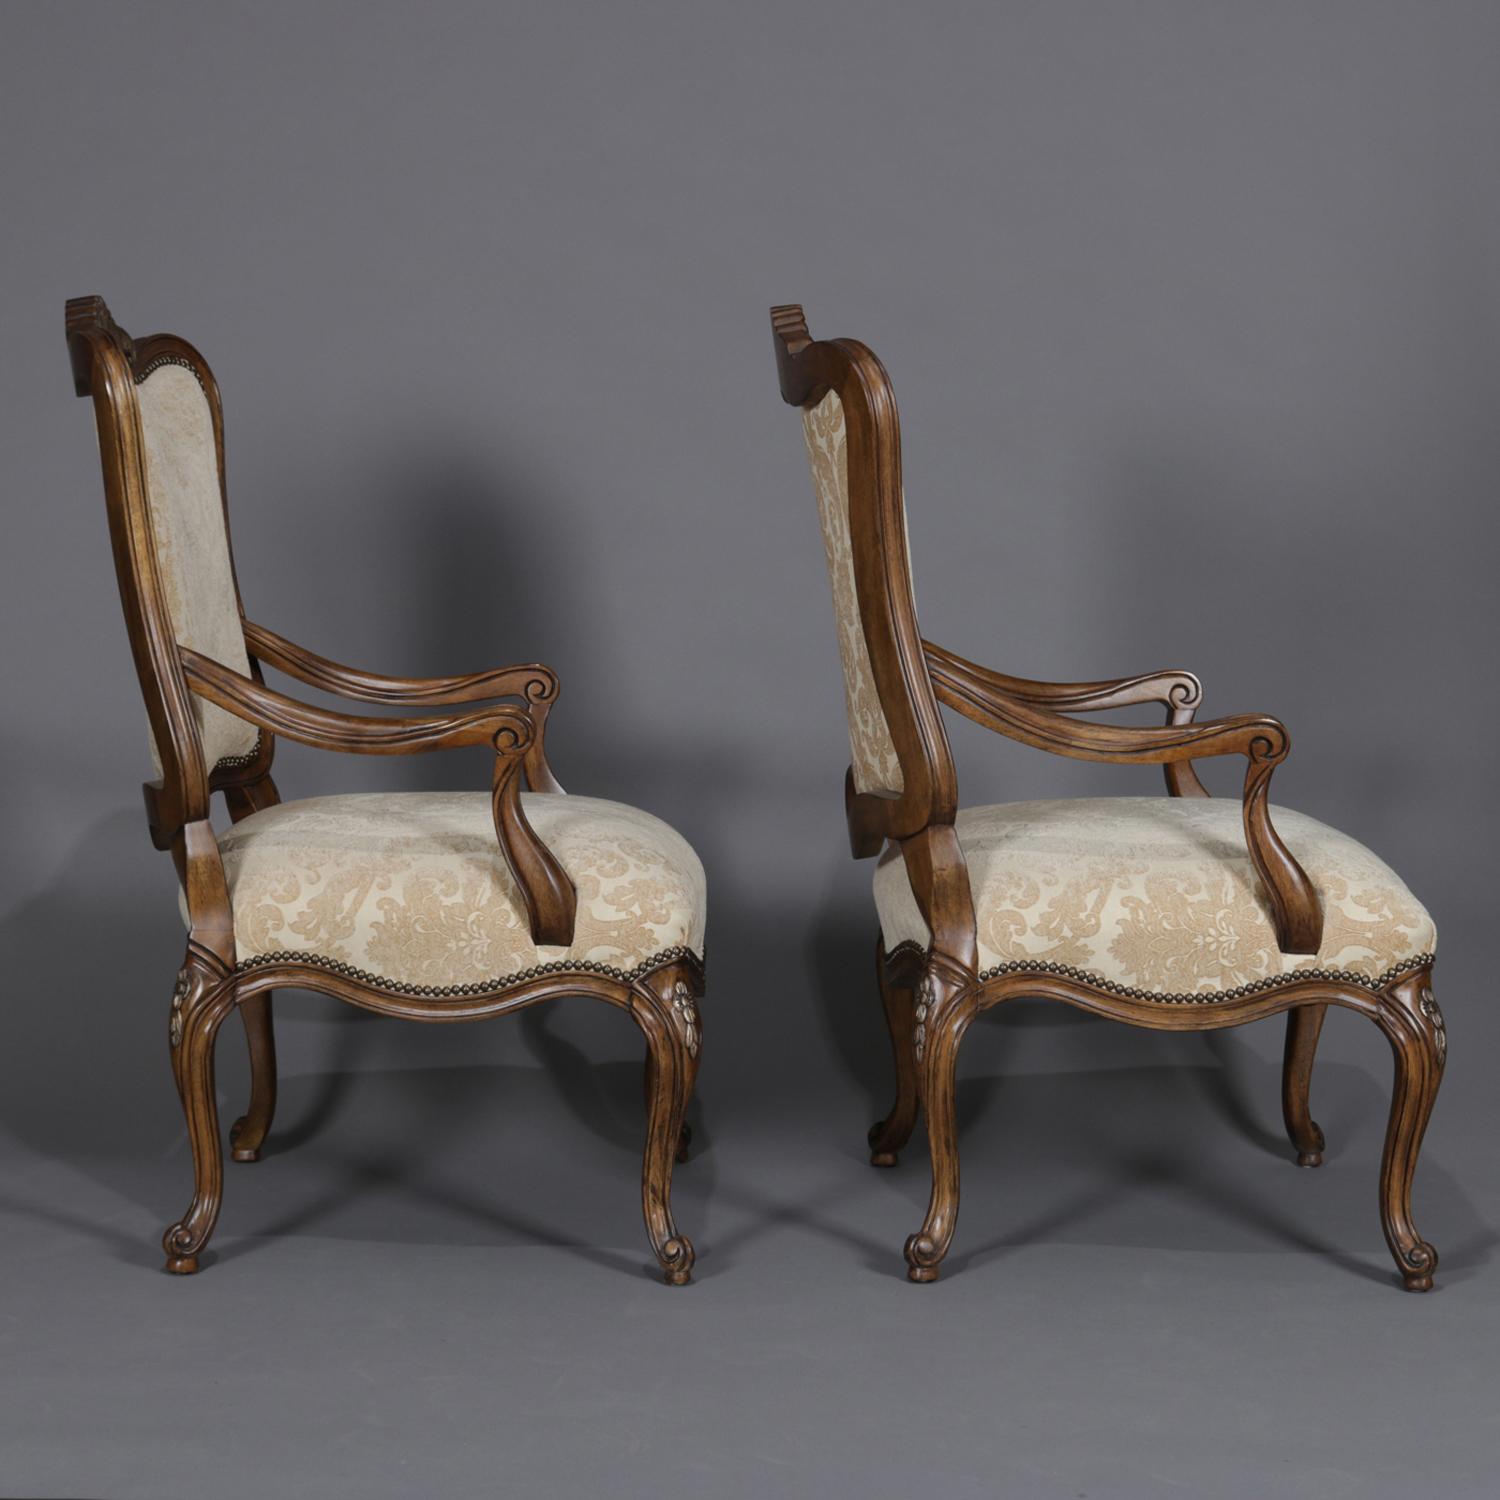 Upholstery Pair of French Louis XV Style Carved and Gilt Mahogany Fauteuil Chairs